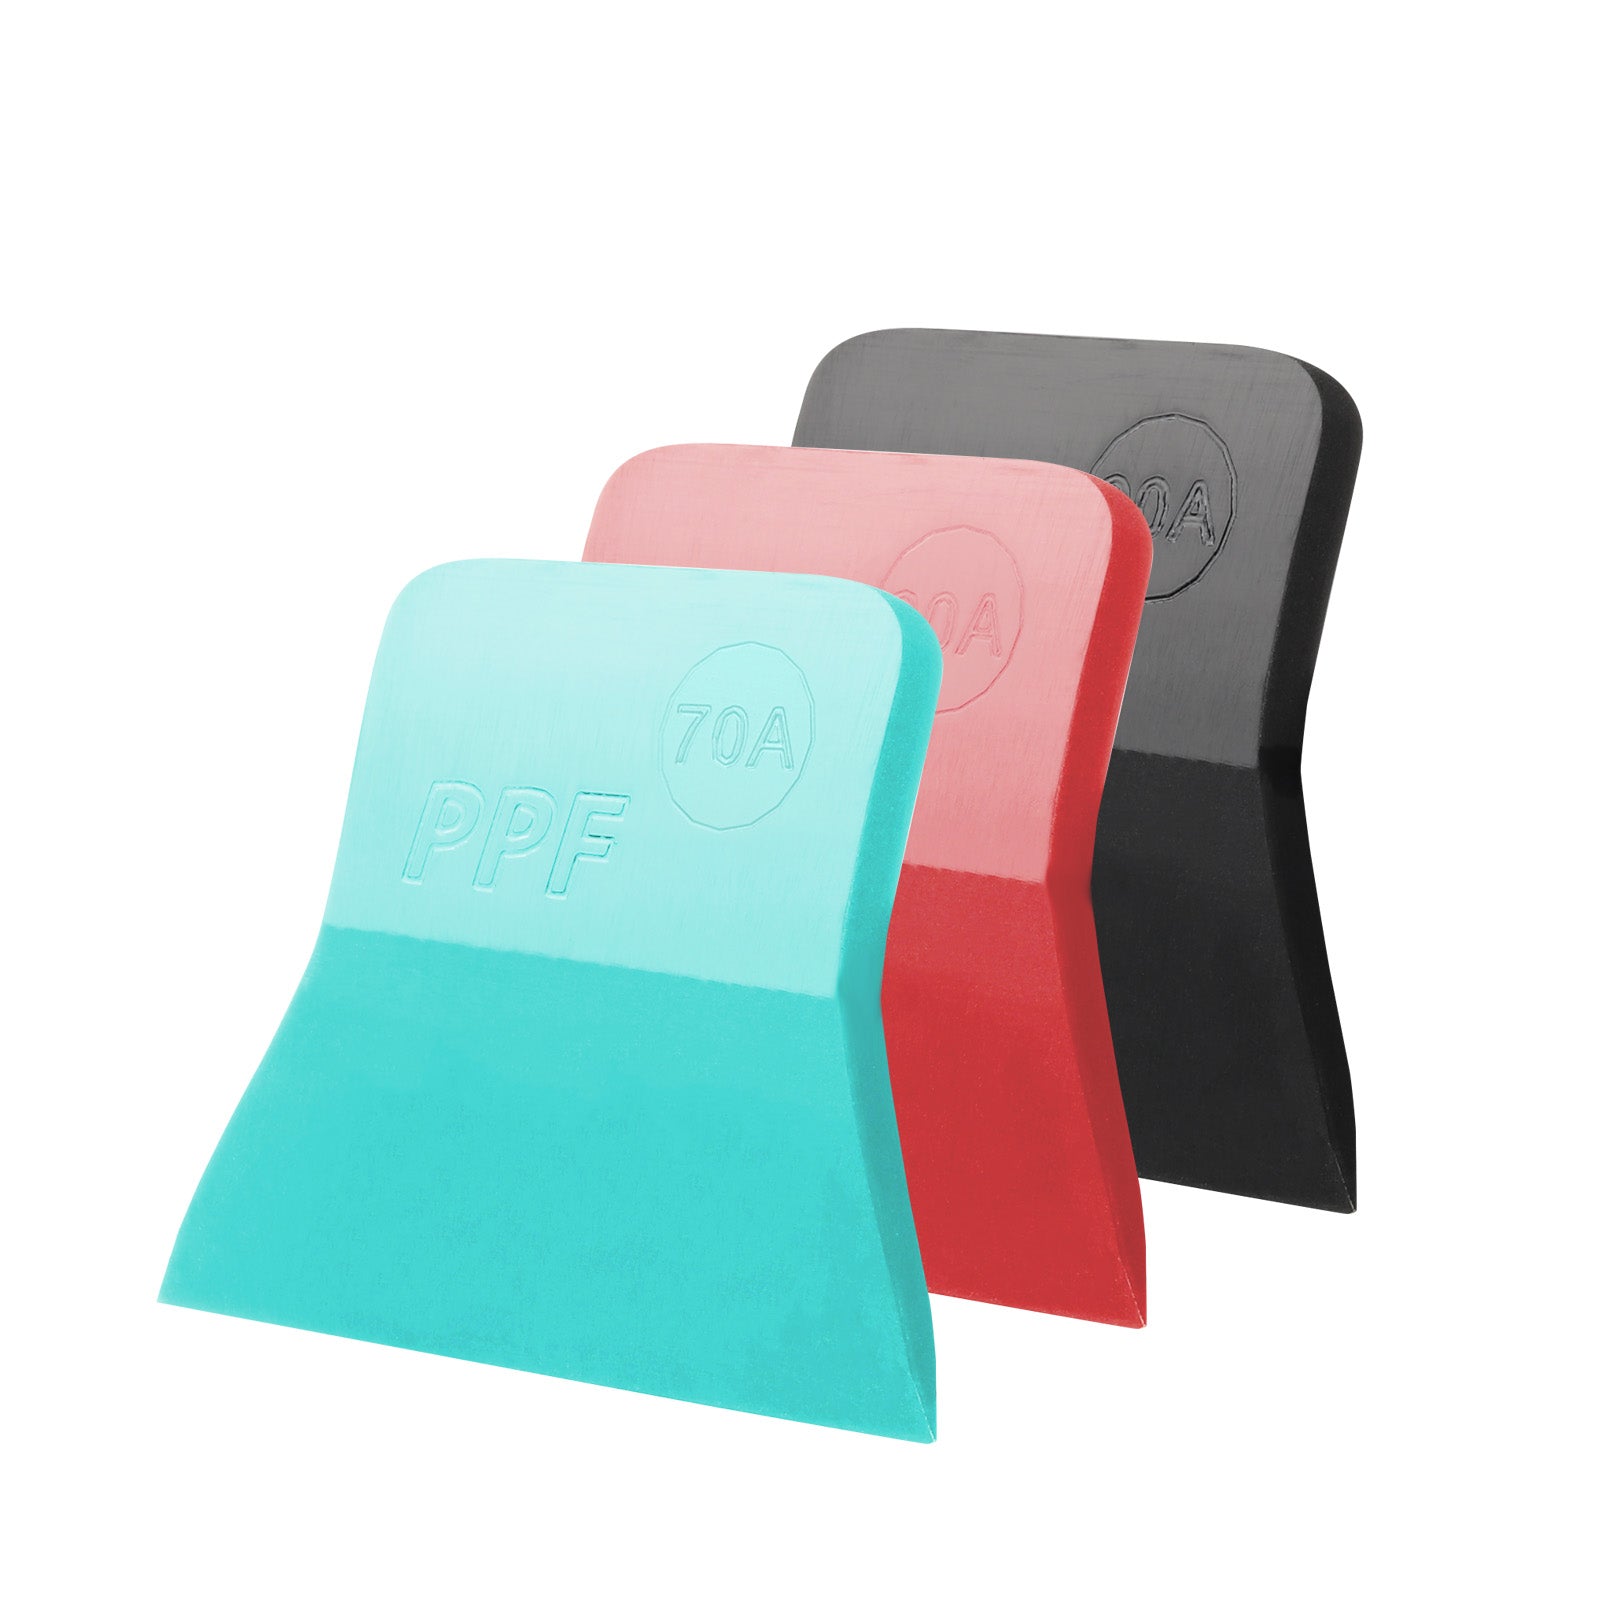 Collection of T-Shape Squeegees in black, blue, and red for PPF